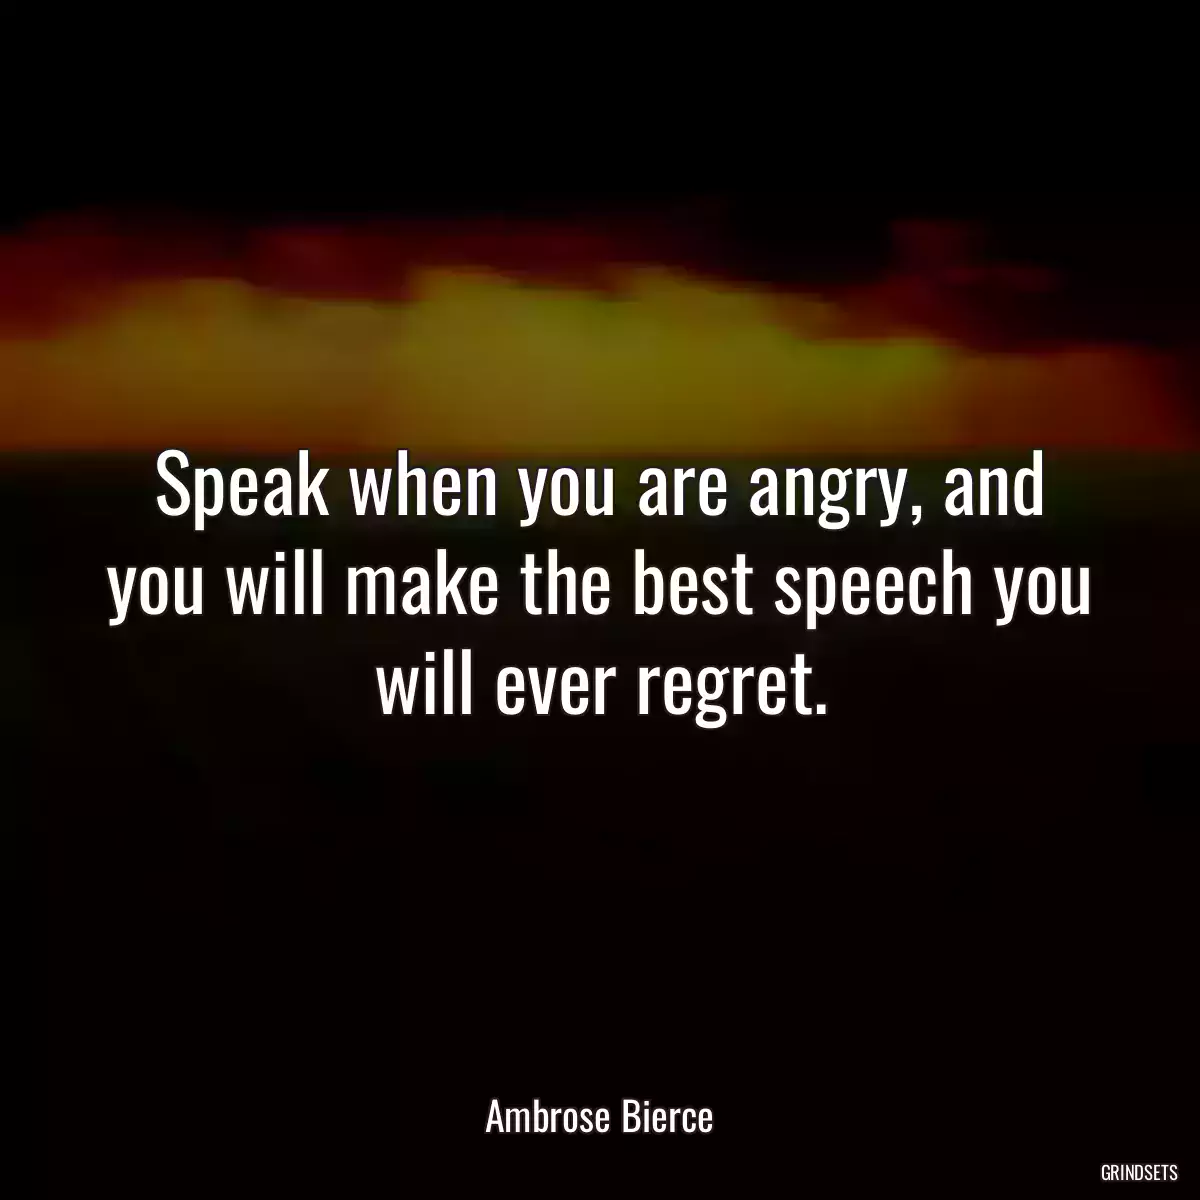 Speak when you are angry, and you will make the best speech you will ever regret.